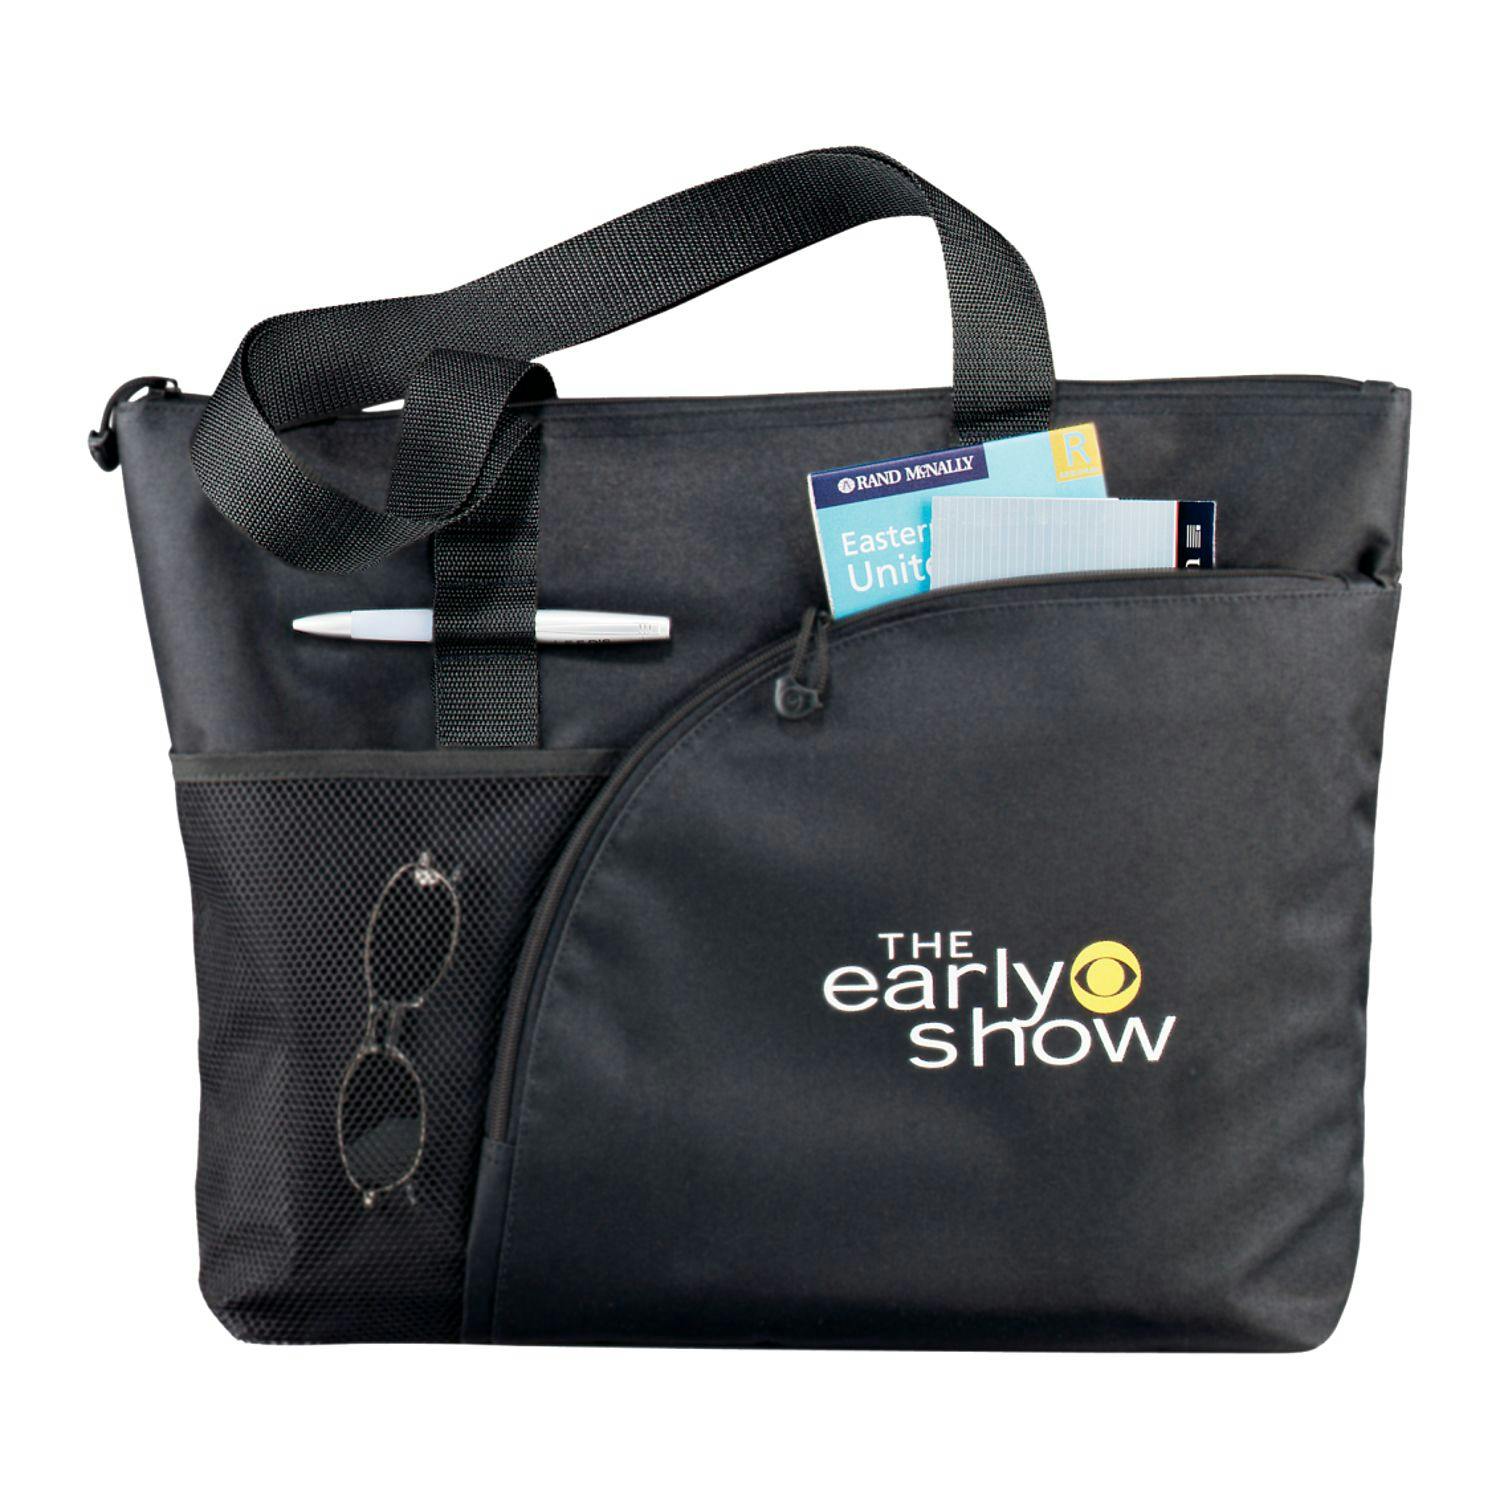 Excel Sport Zippered Utility Business Tote - additional Image 3